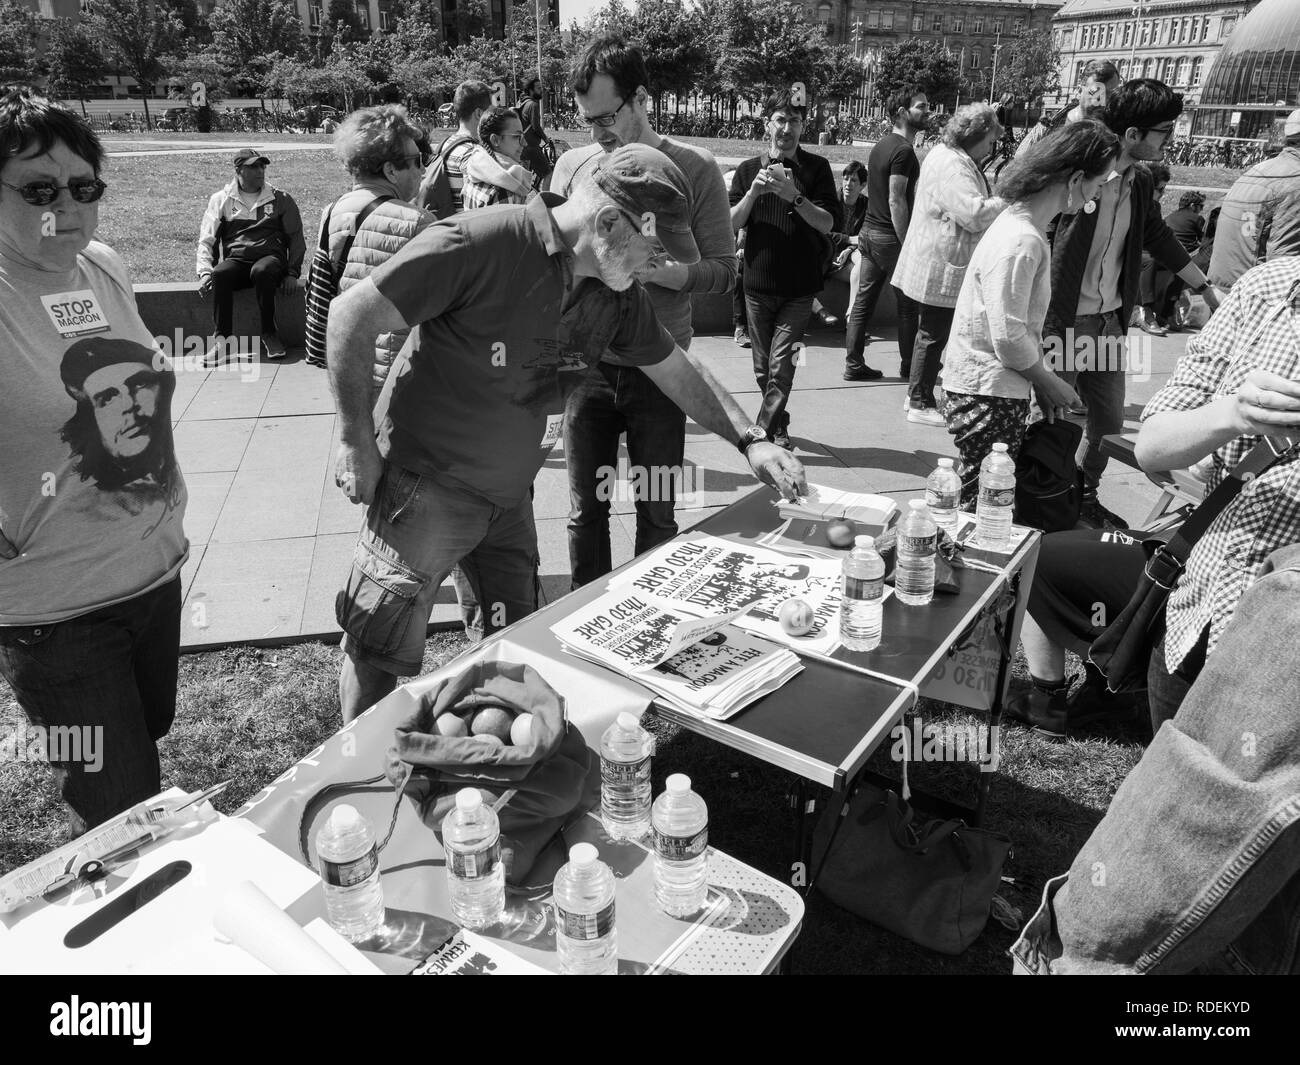 STRASBOURG, FRANCE - MAY 5, 2018: People making a party protest Fete a Macron in front of Gare de Strasbourg - people seniors taking flyers from table Stock Photo